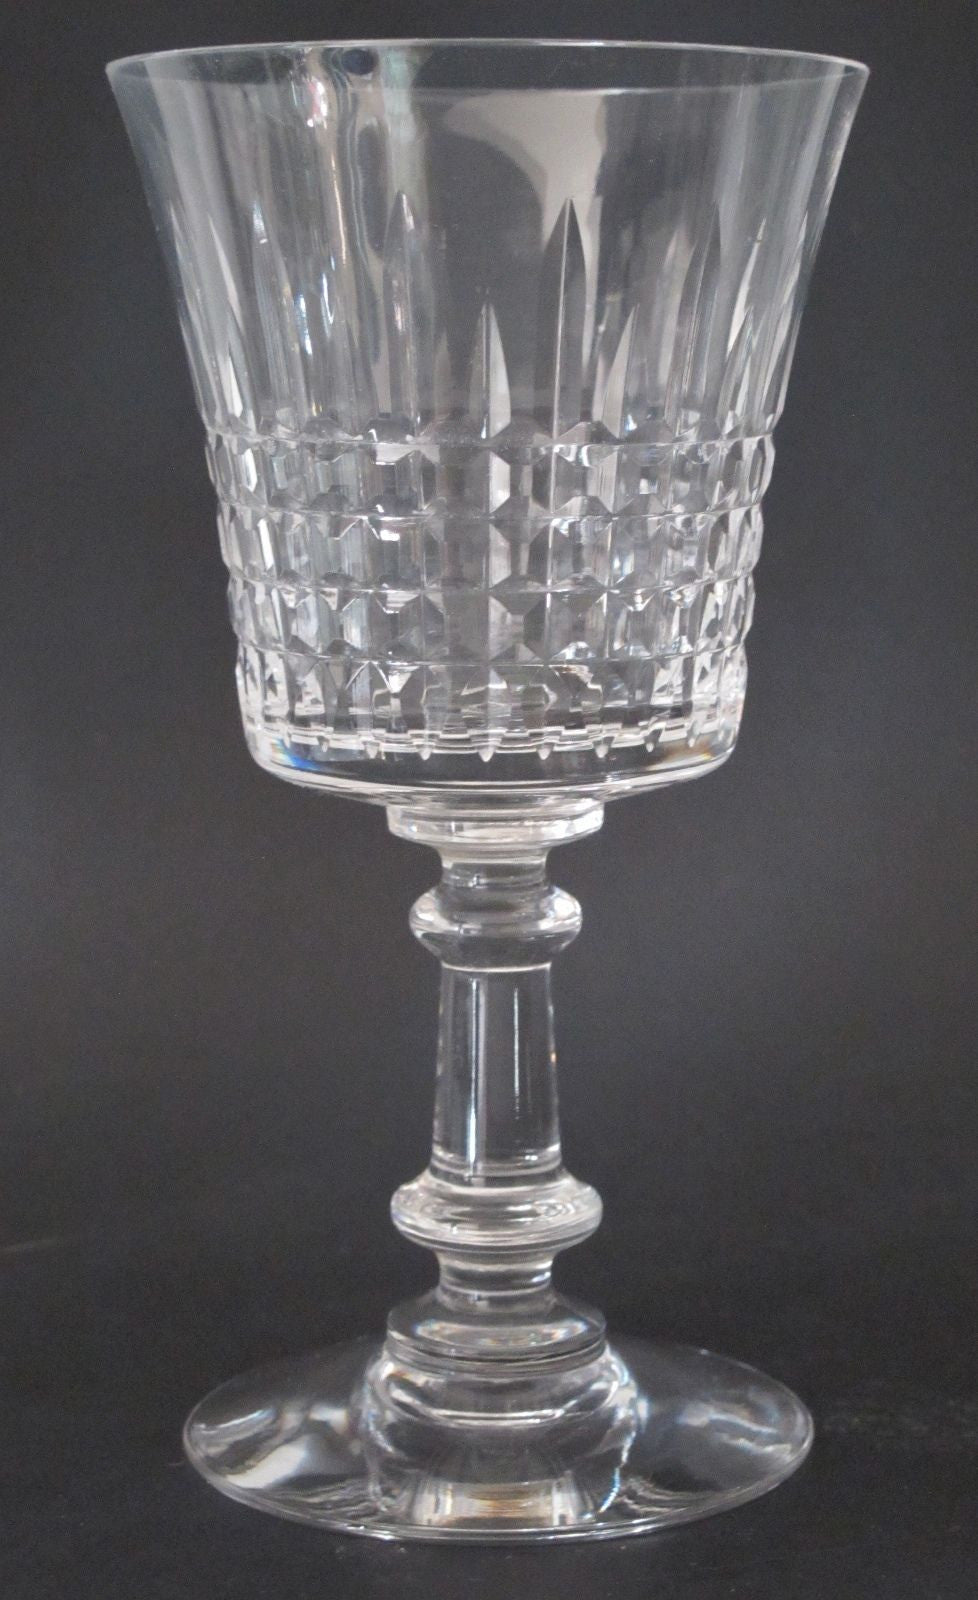 Cut glass water goblet vsl ? - O'Rourke crystal awards & gifts abp cut glass